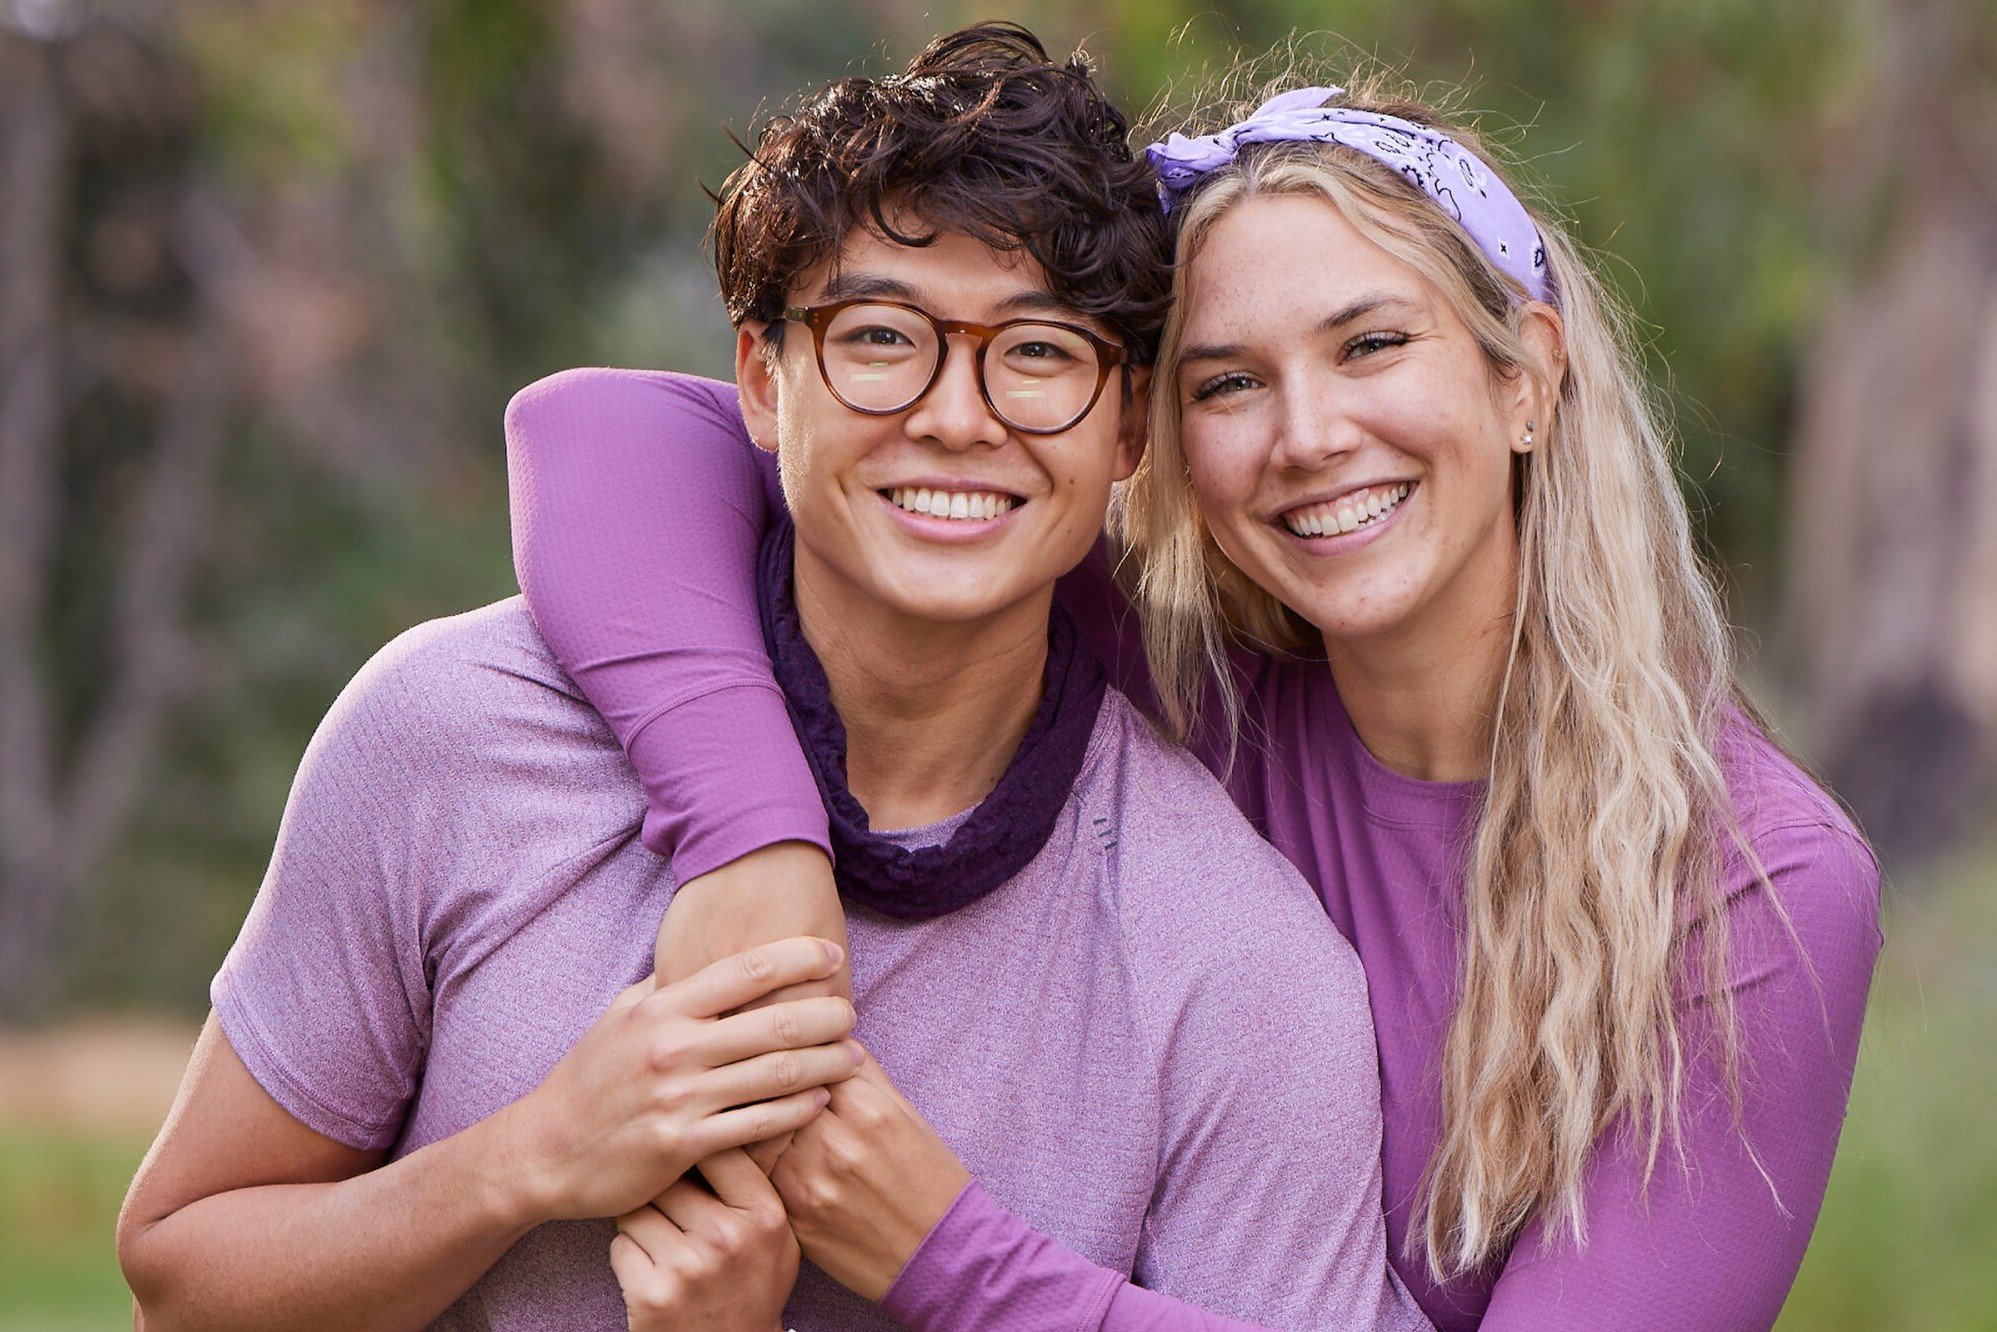 Derek Xiao and Claire Rehfuss, who, according to 'The Amazing Race' Season 34 spoilers make it far in the competition,